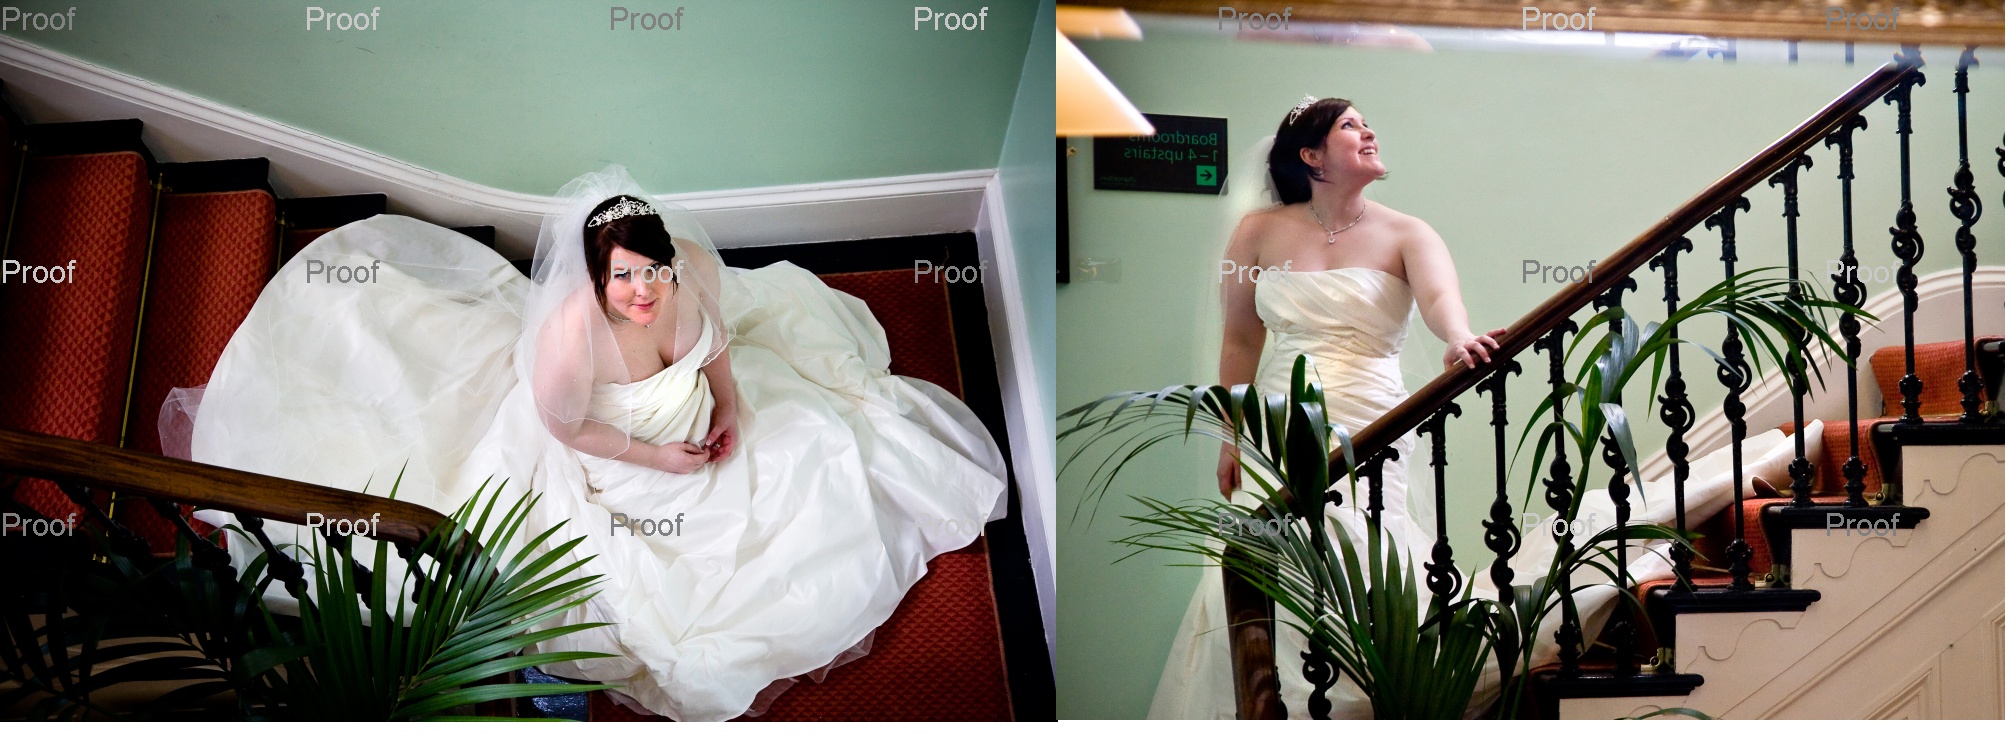 pages 68-69 of wedding storybook album with bride on staircase and in mirror at Chancellors Hotel